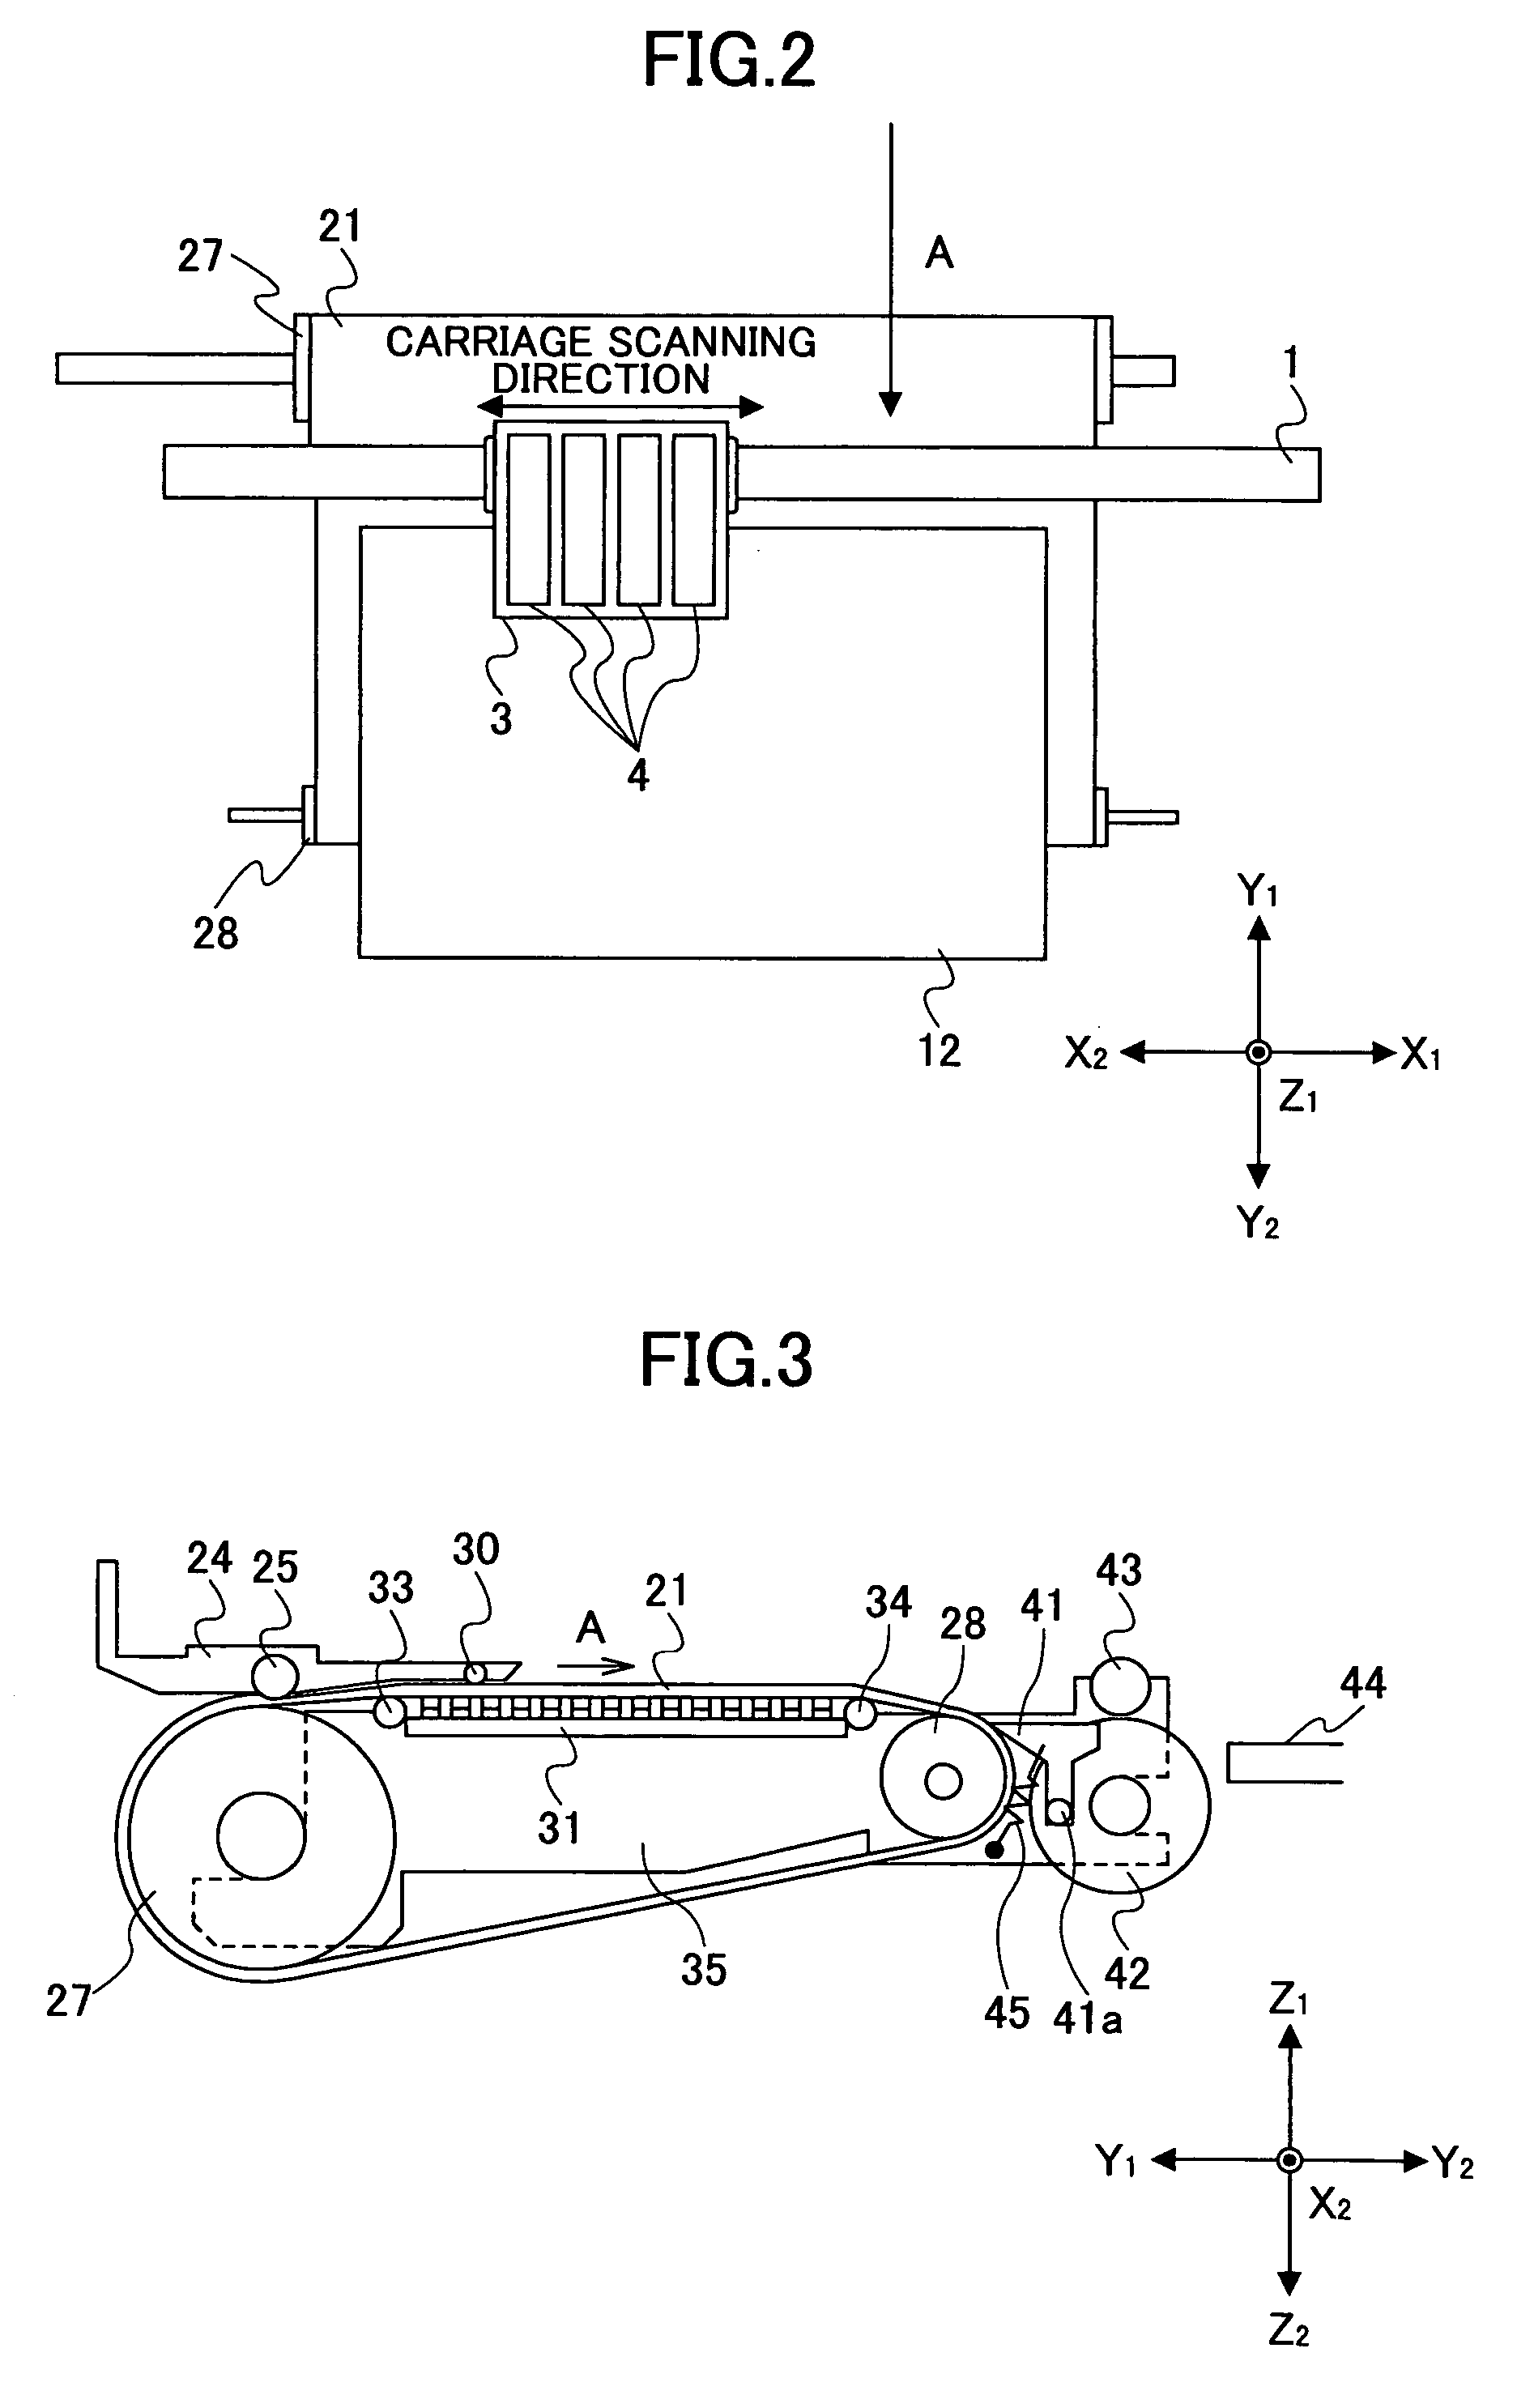 Stably operable image-forming apparatus with improved paper conveying and ejecting mechanism